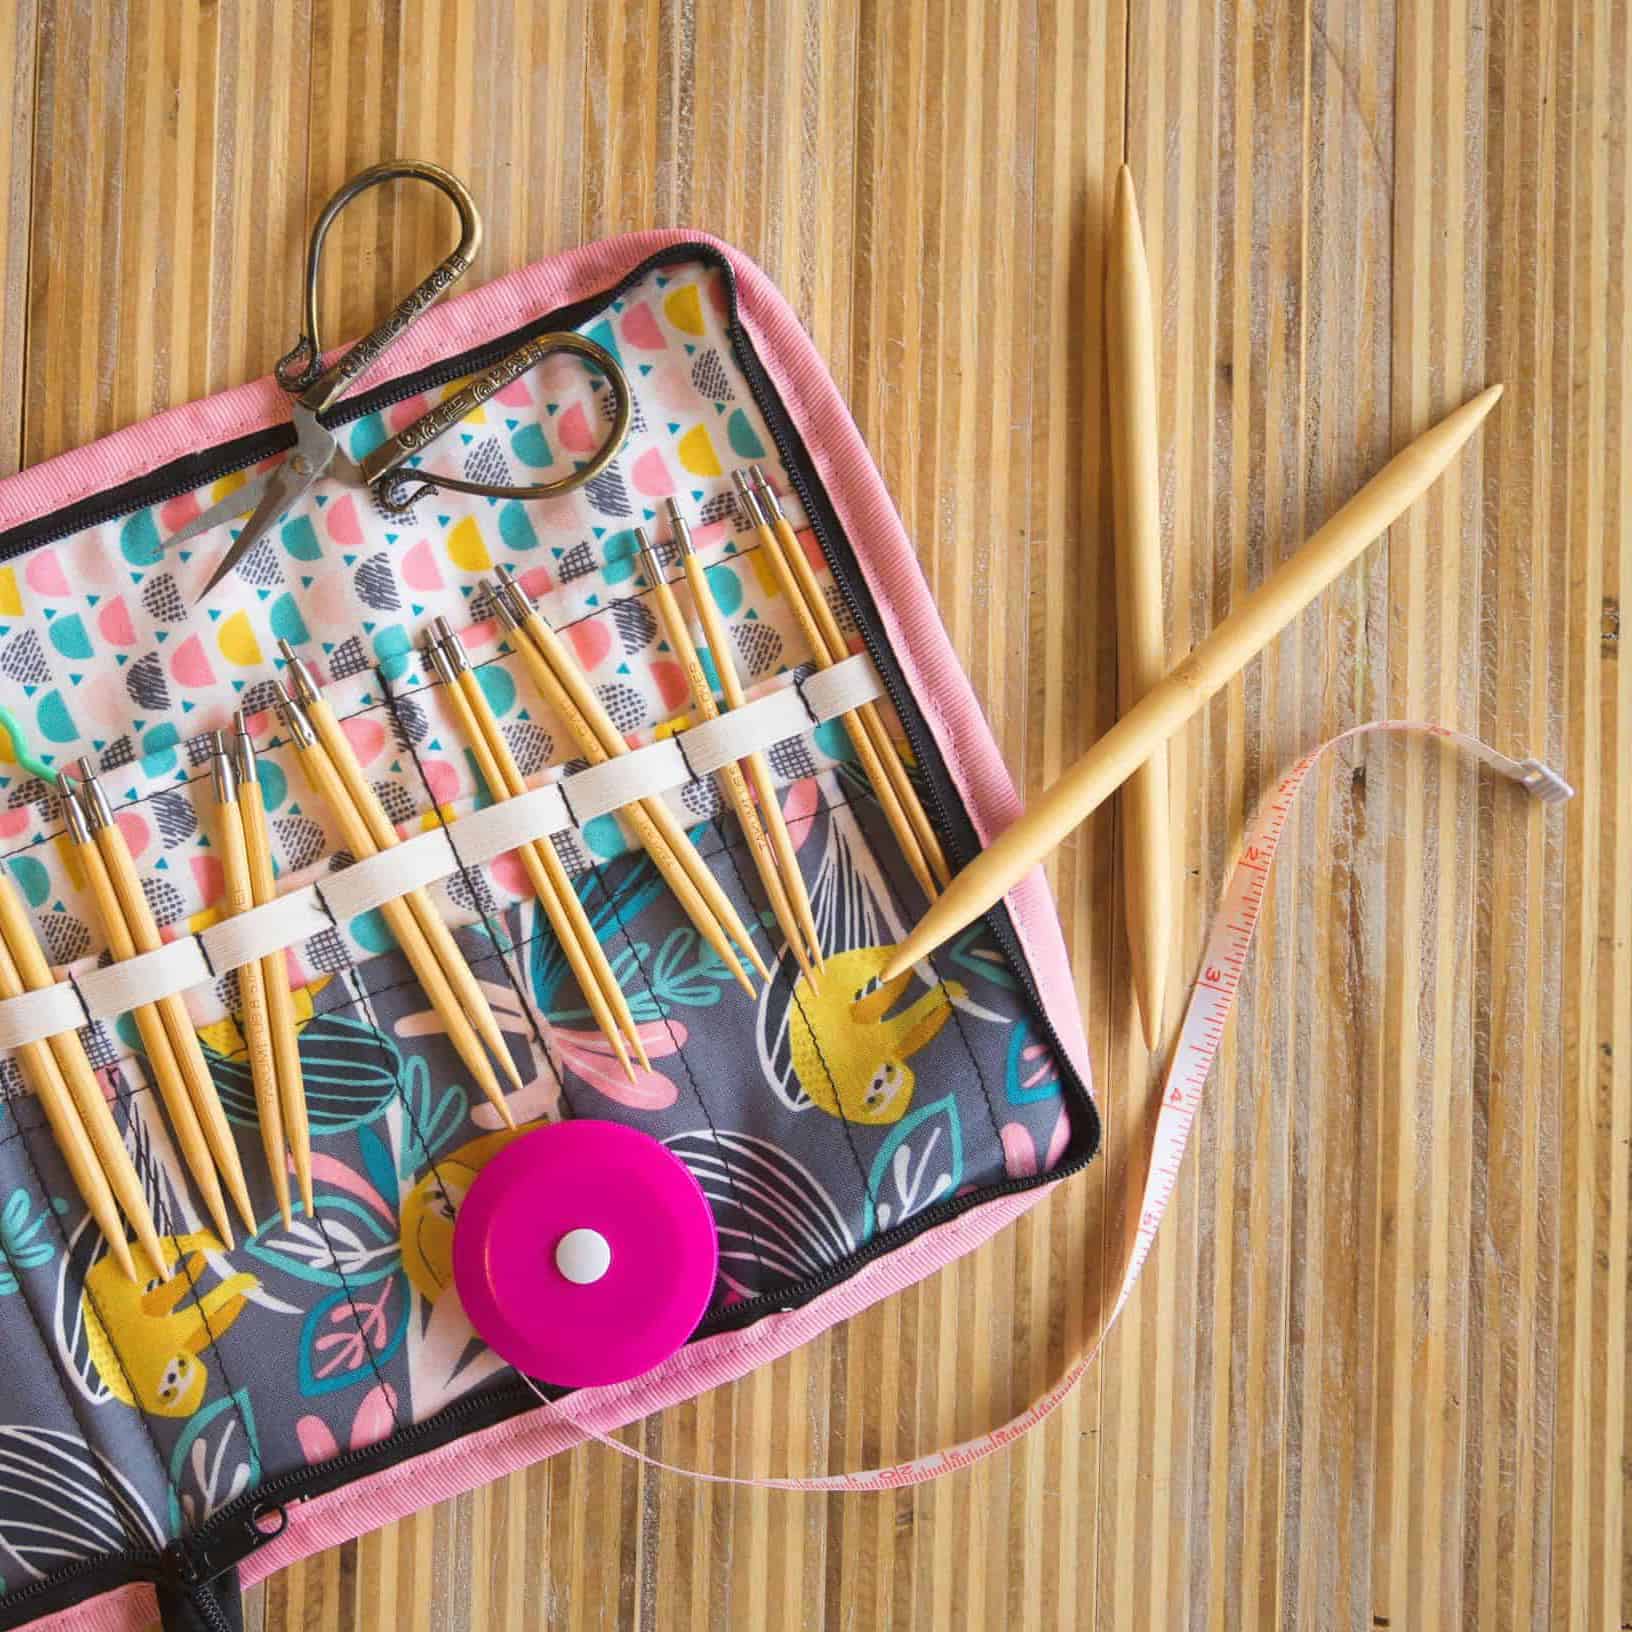 A knitting needle case filled with wooden needles.